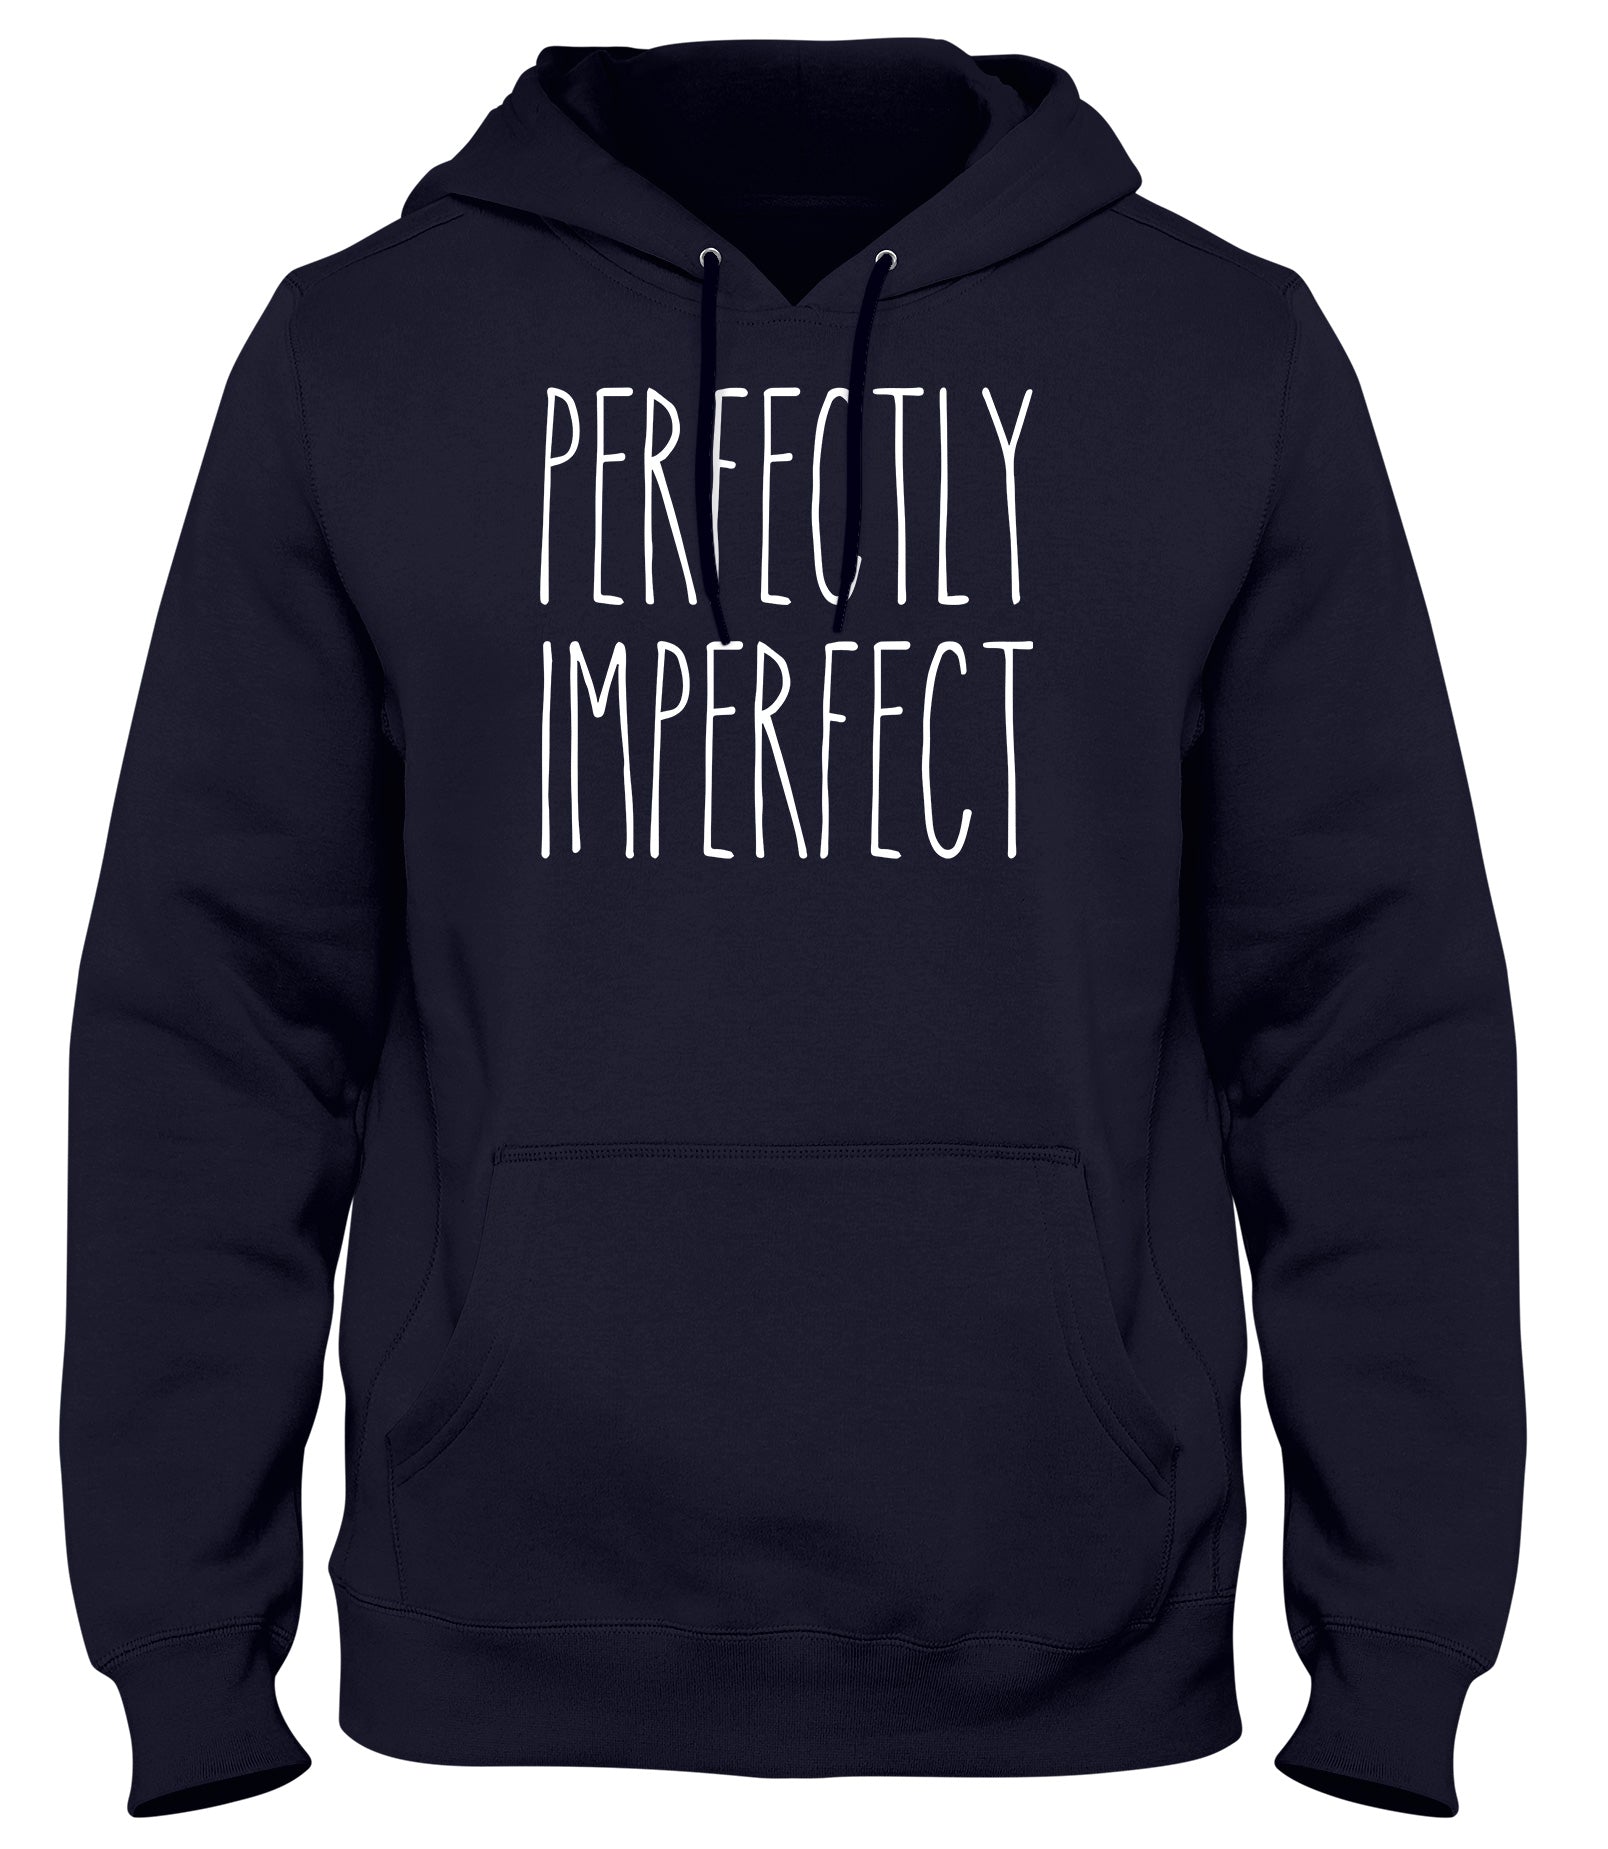 PERFECTLY IMPERFECT MENS WOMENS UNISEX FUNNY HOODIE